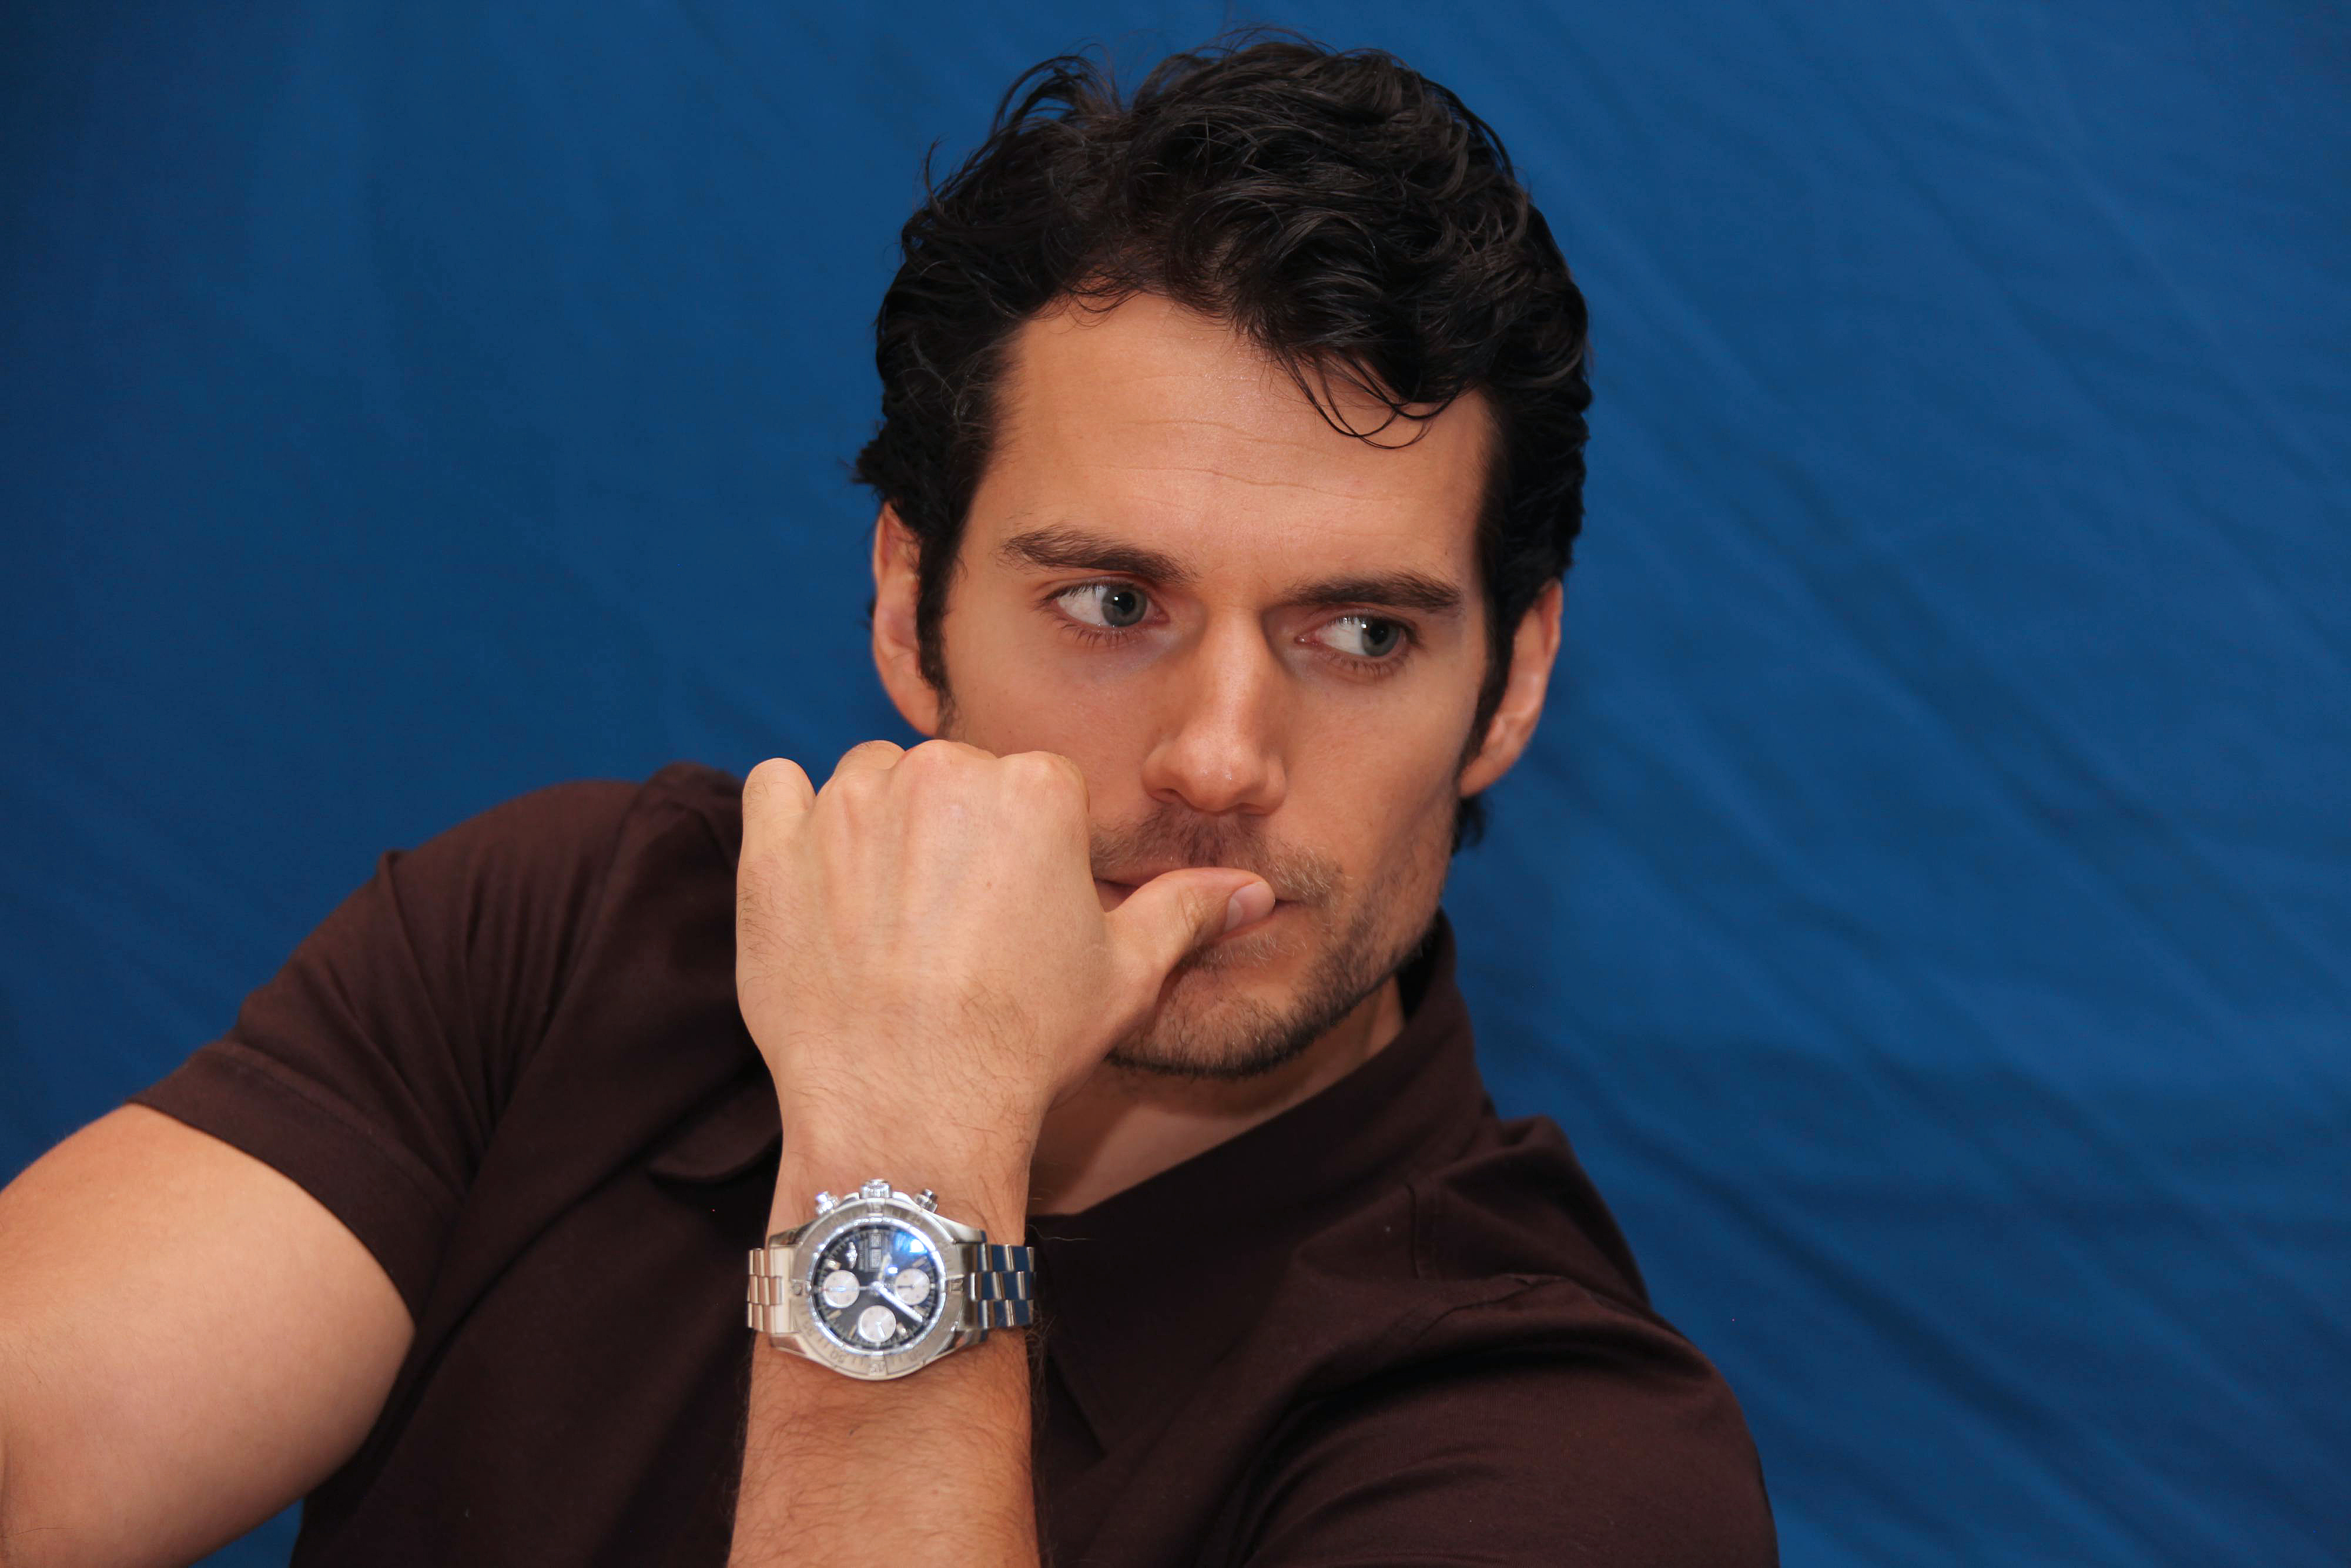 Four classic Henry Cavill photos in full hi-res here: 1, 2, 3